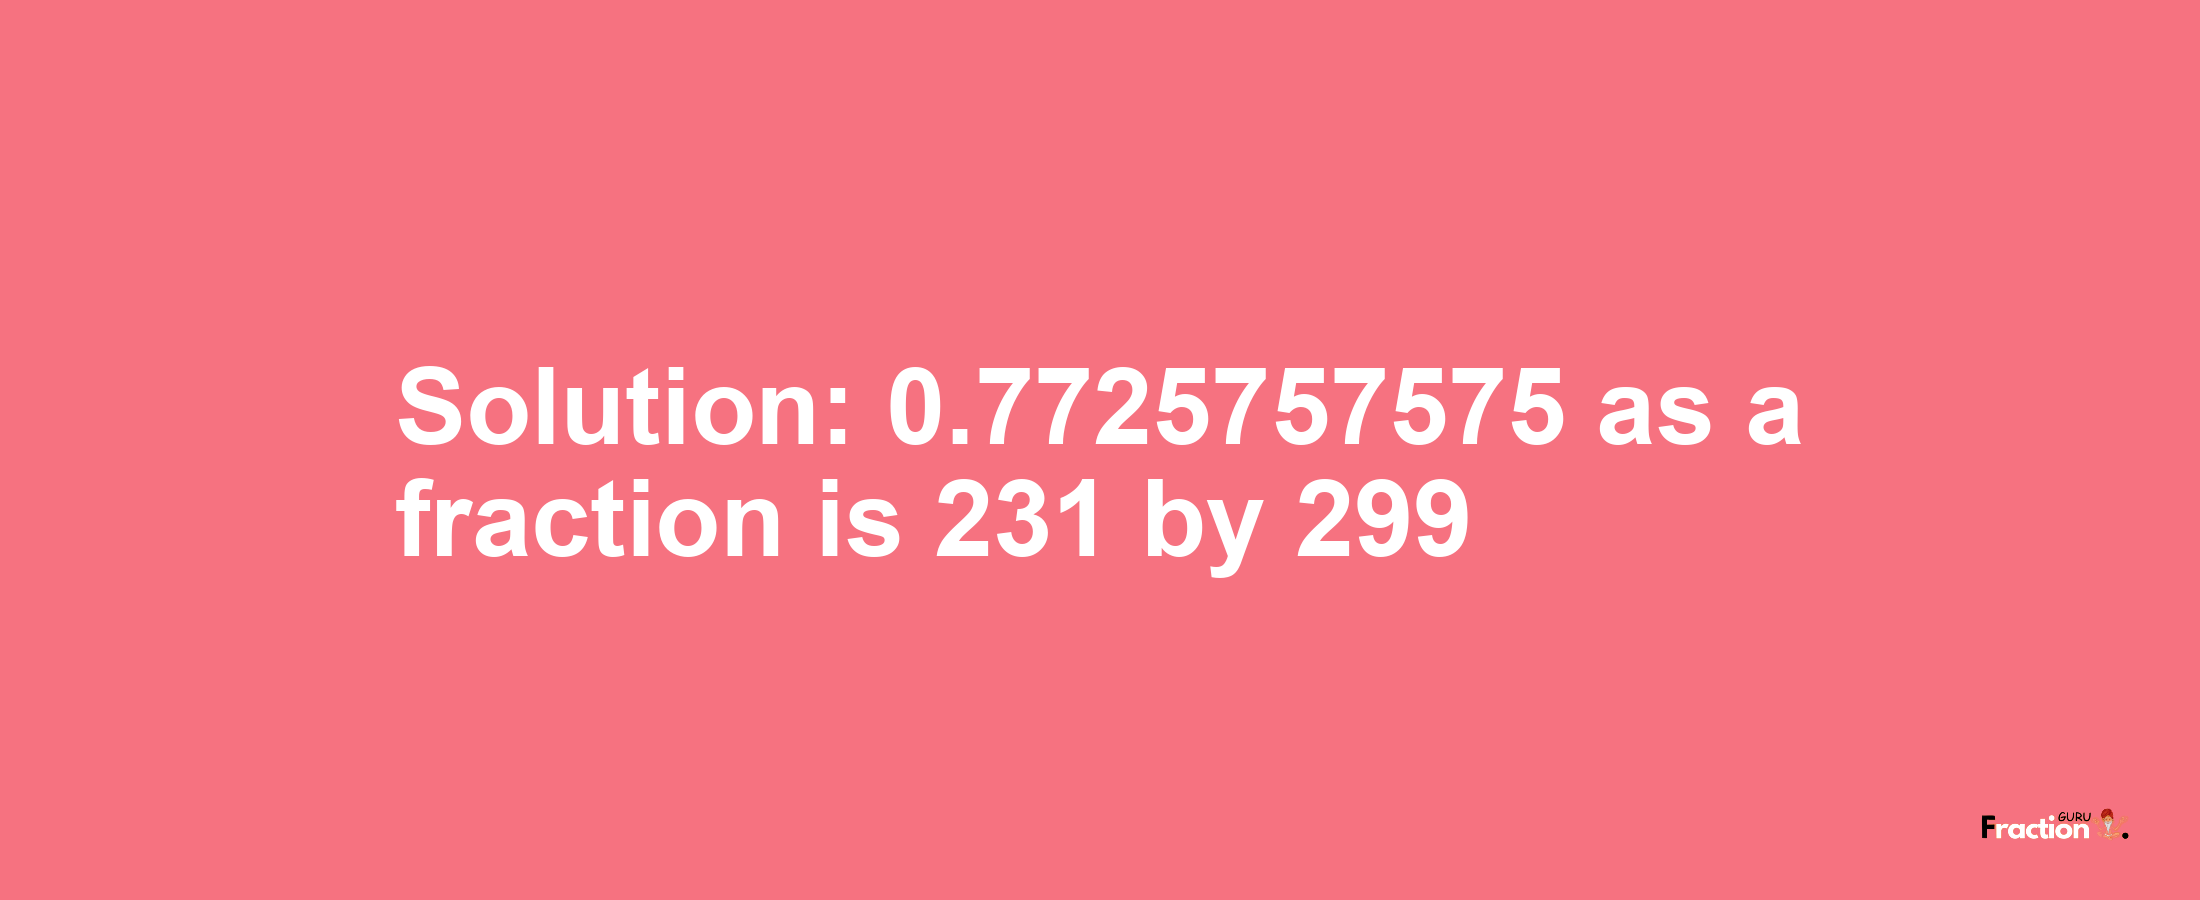 Solution:0.7725757575 as a fraction is 231/299